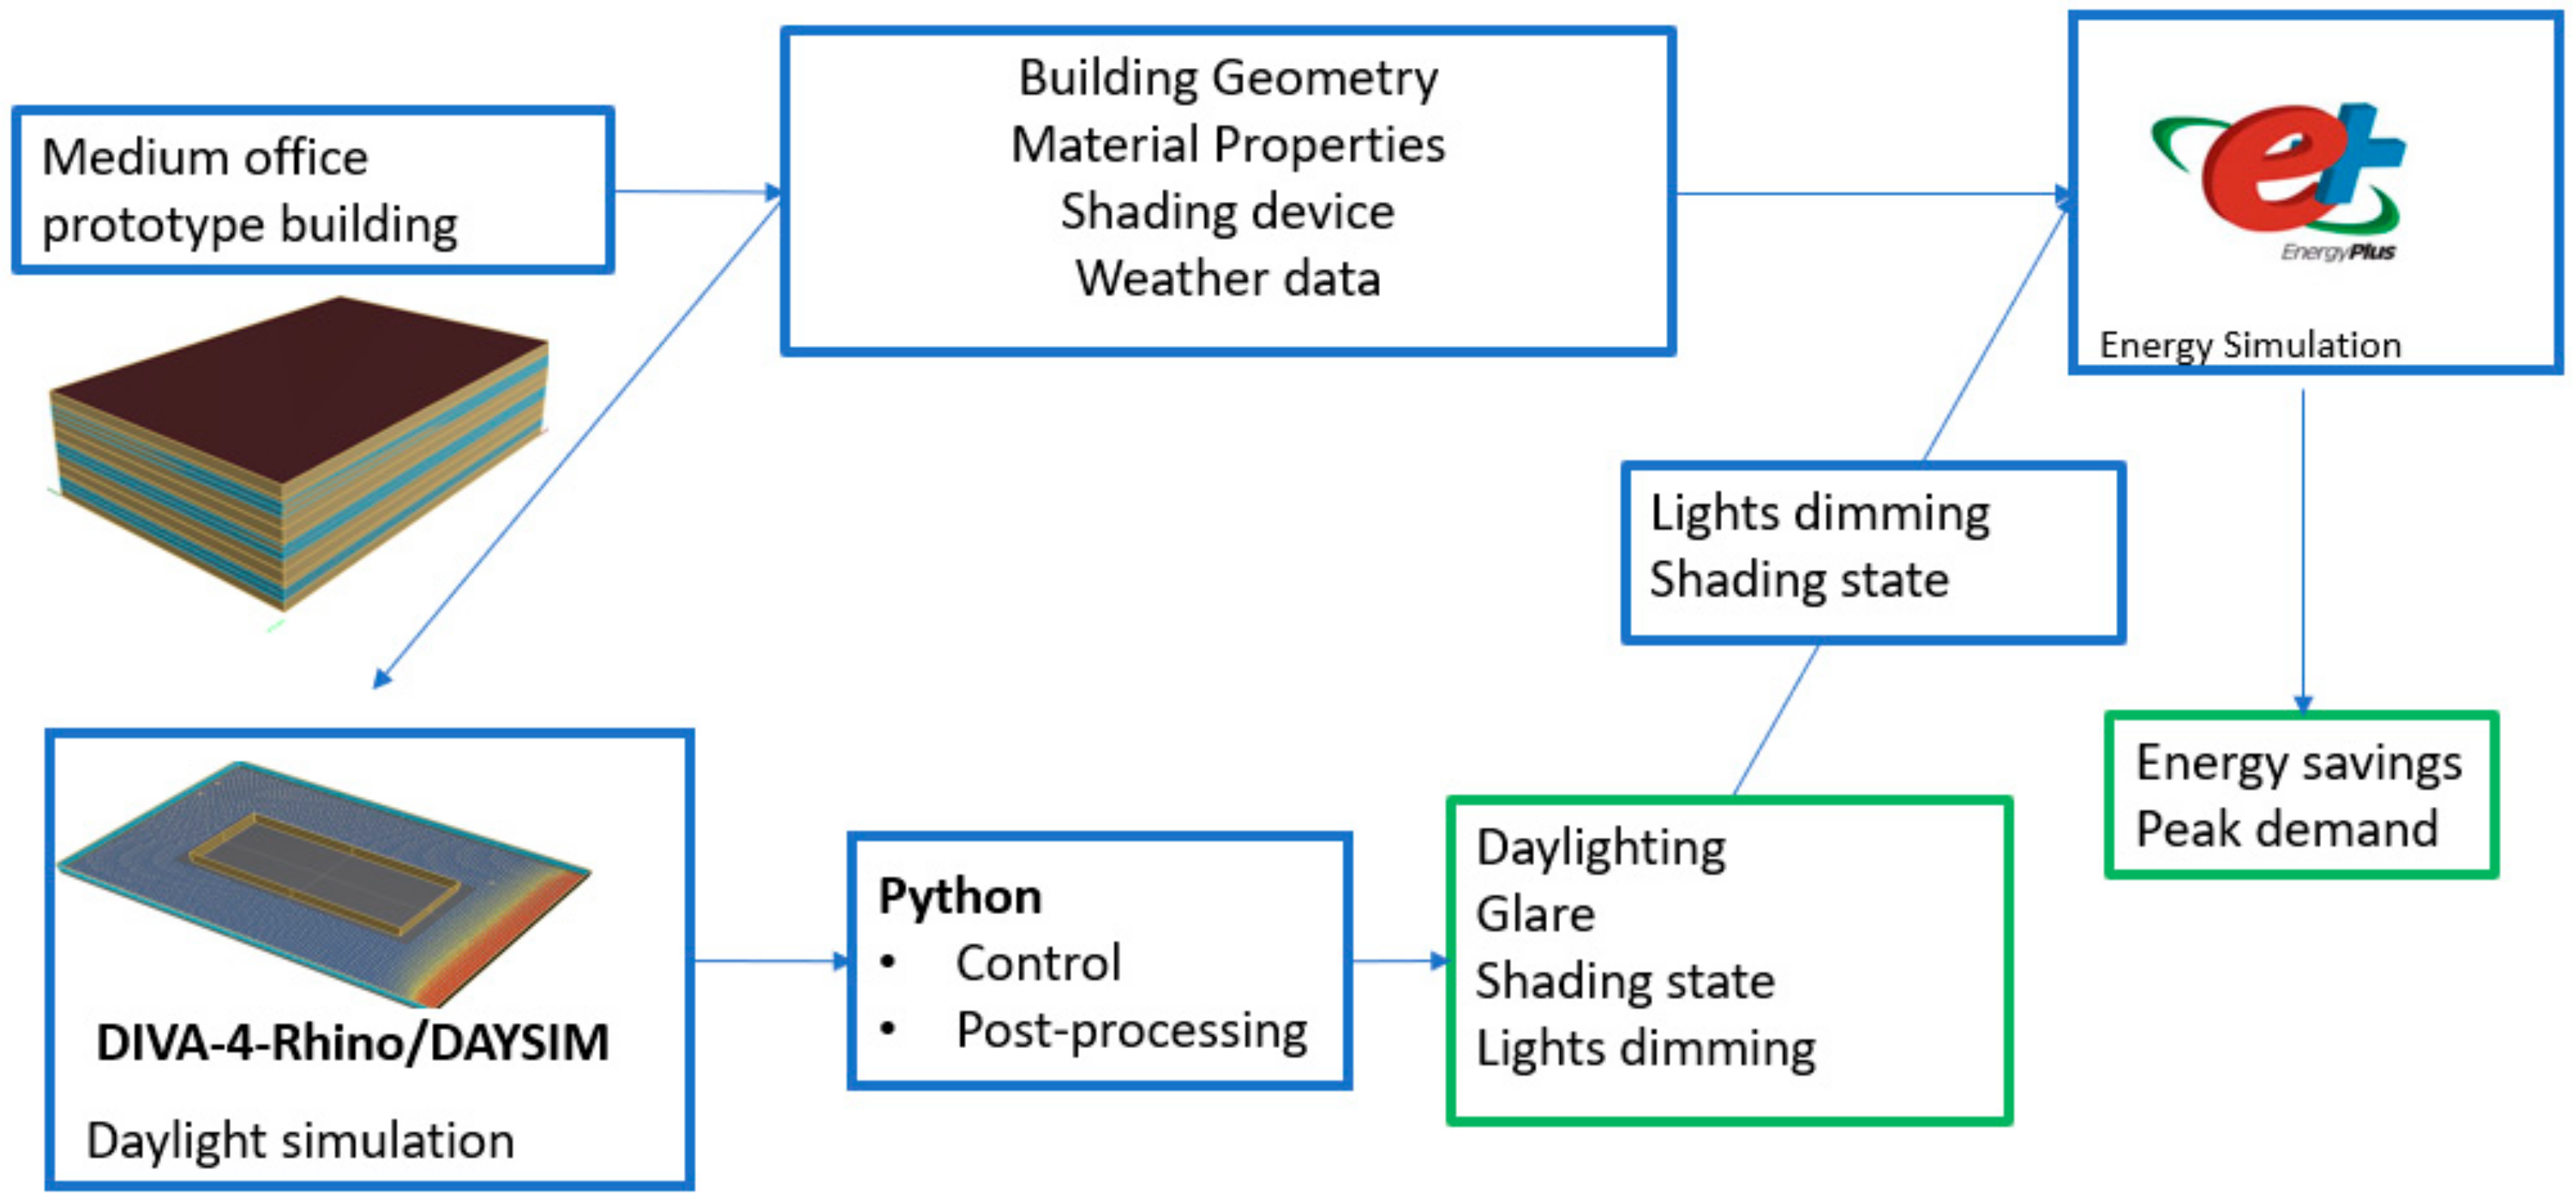 Energies | Free Full-Text | A Analysis of Energy and Daylighting Impact of Window Shading Systems and Control Strategies on Buildings in the United States | HTML